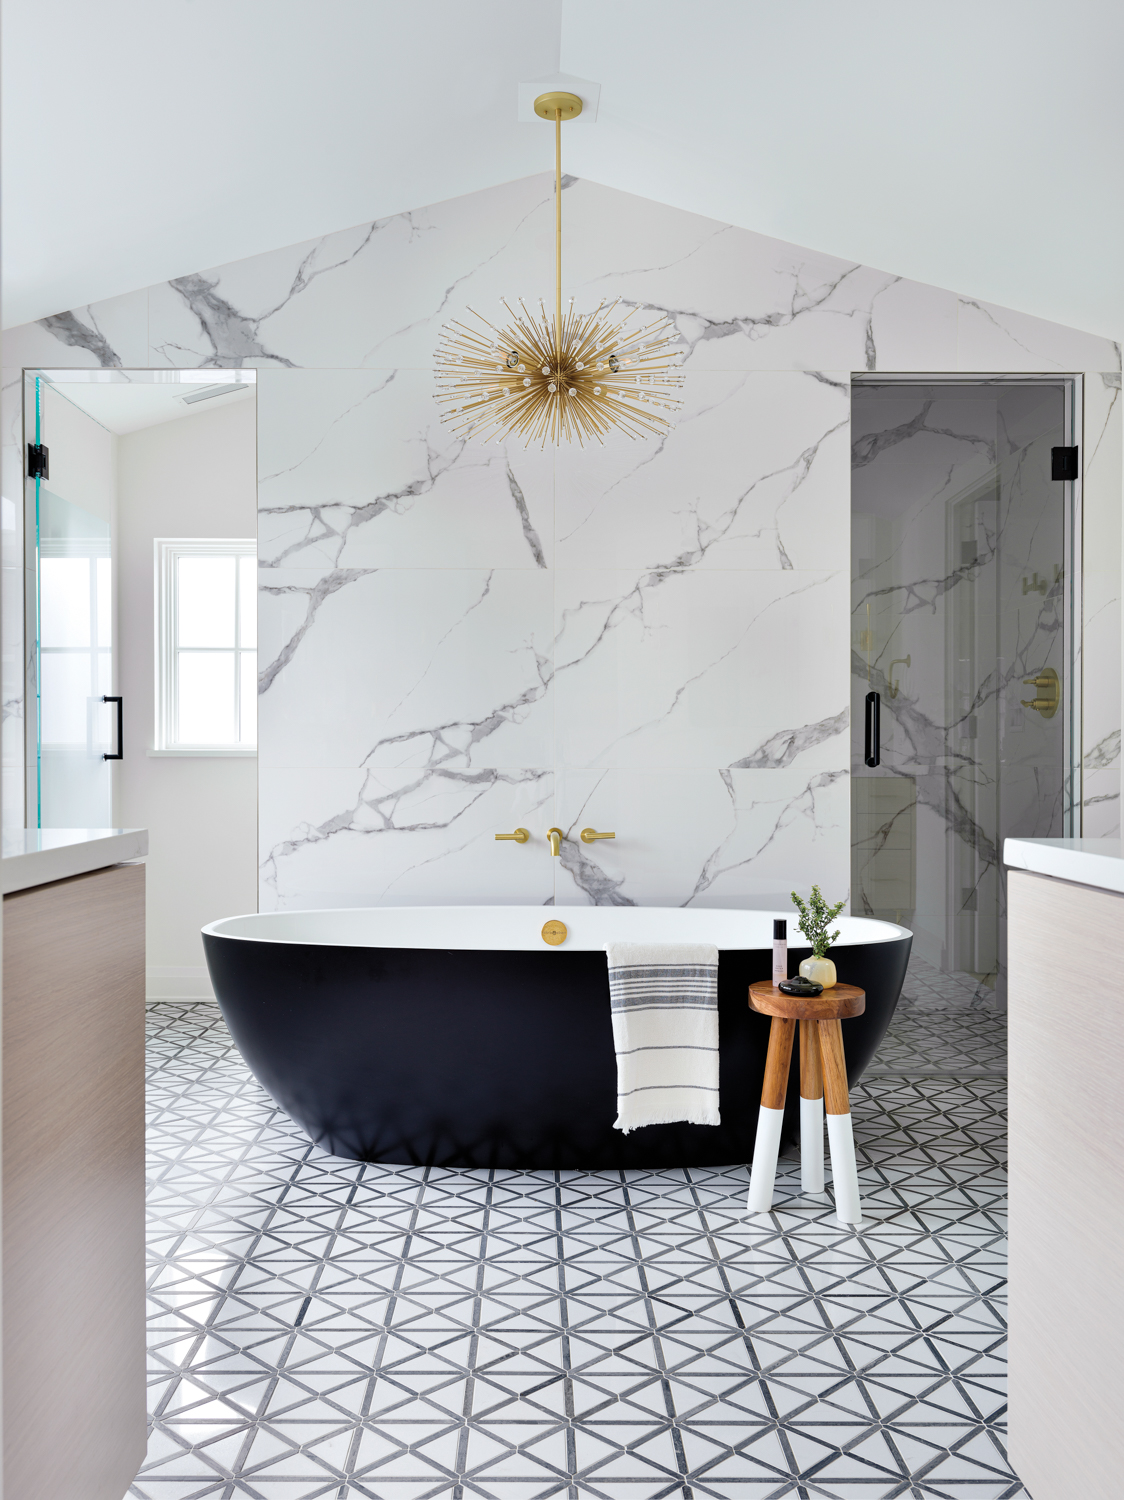 A the center of a bathroom is a black bathtub in front of a gray-and-white porcelain feature wall.